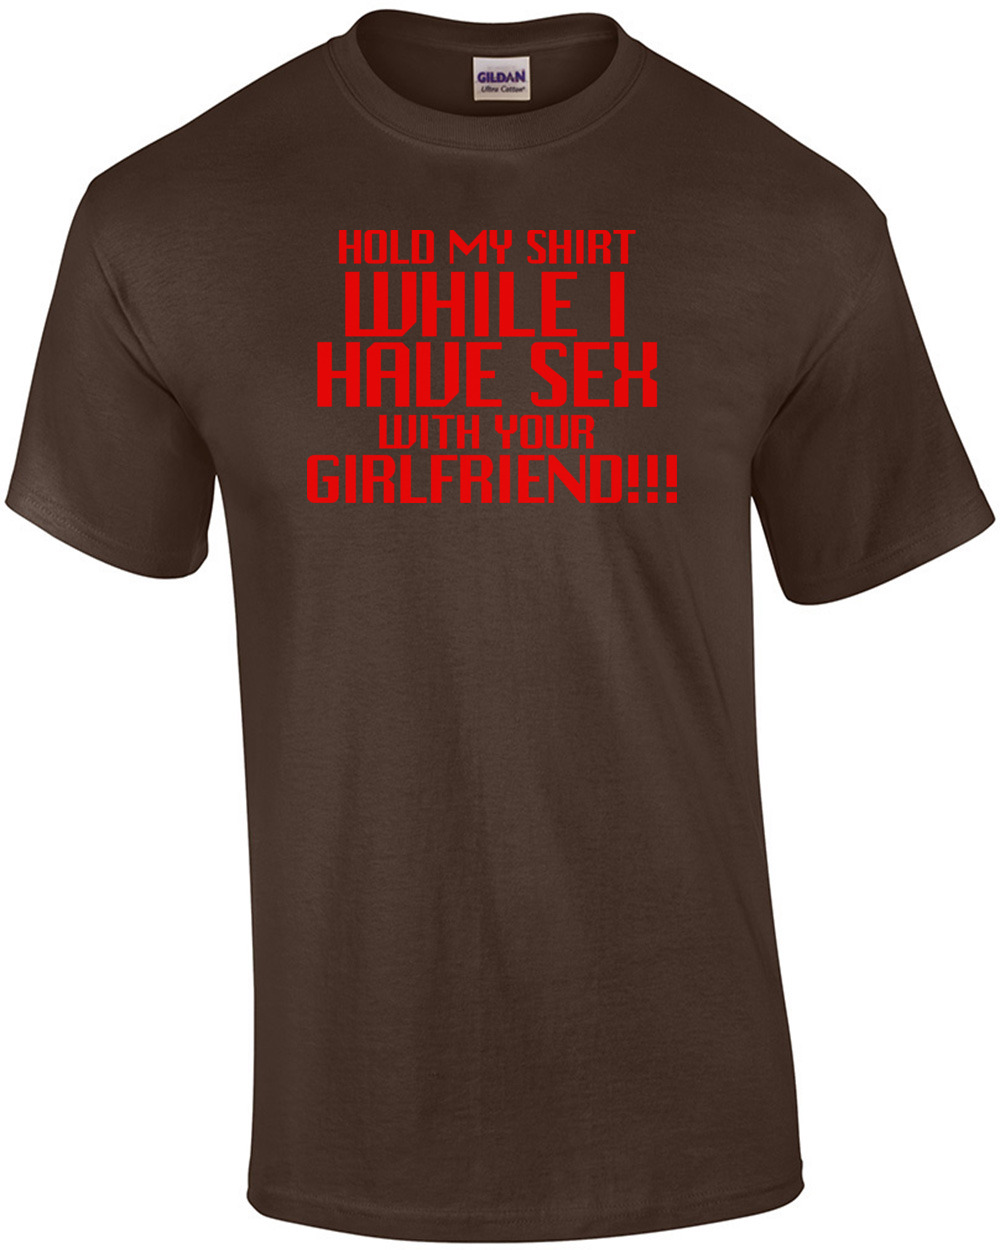 Hold My Shirt While Have Sex With Your Girlfriend Funny Shirt eBay image